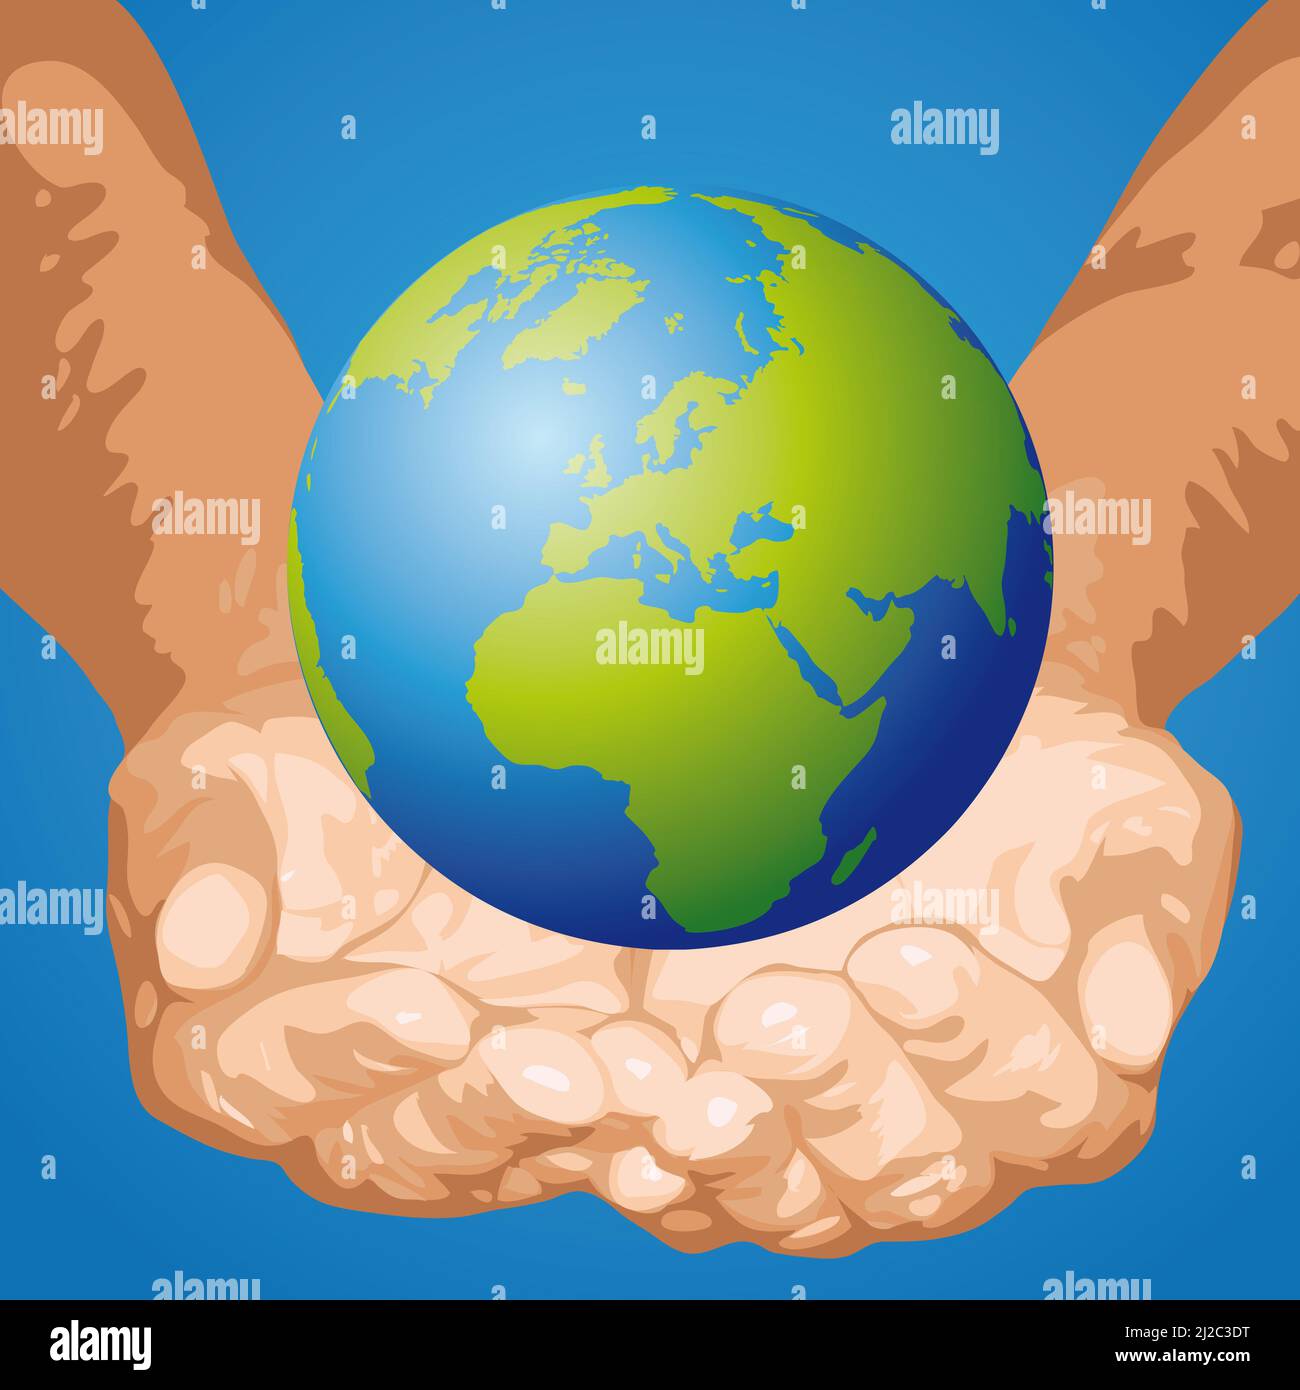 Hand protecting the world, environment protection, vector illustration. Stock Photo